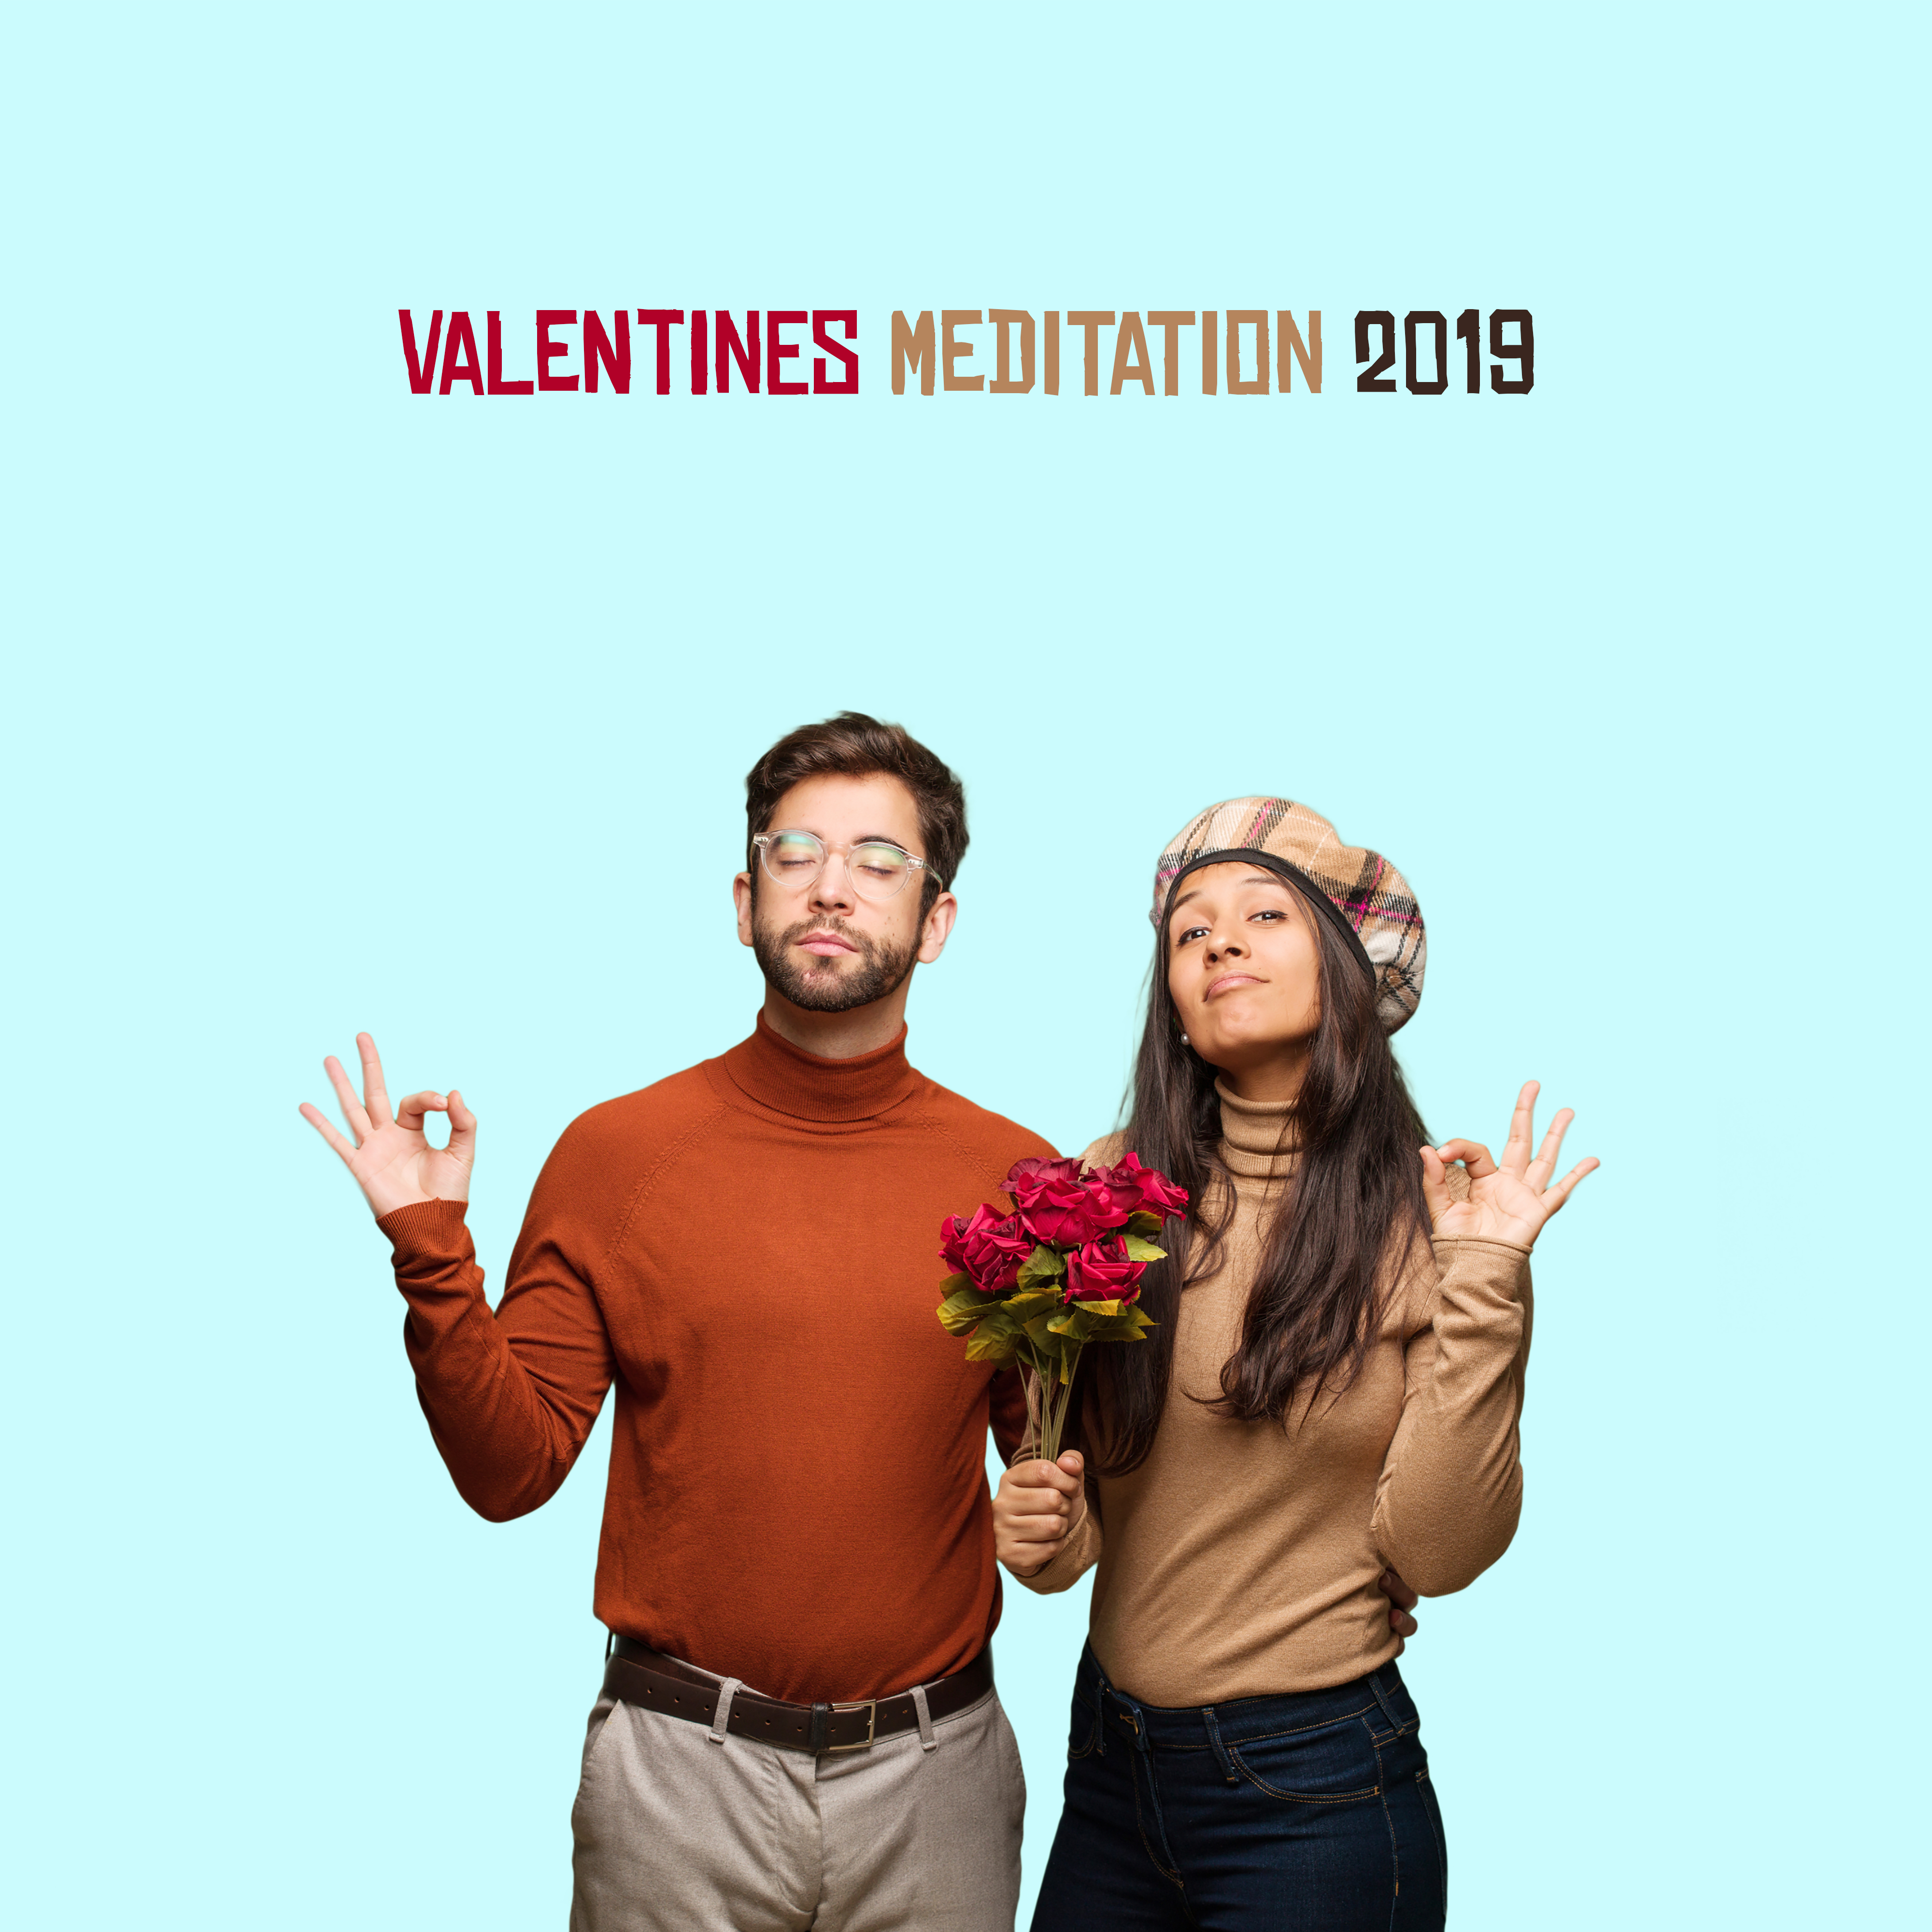 Valentines Meditation 2019 – Sensual Music for Yoga, Deep Meditation for Lovers, Tantric Music to Calm Down, Erotic Yoga Music